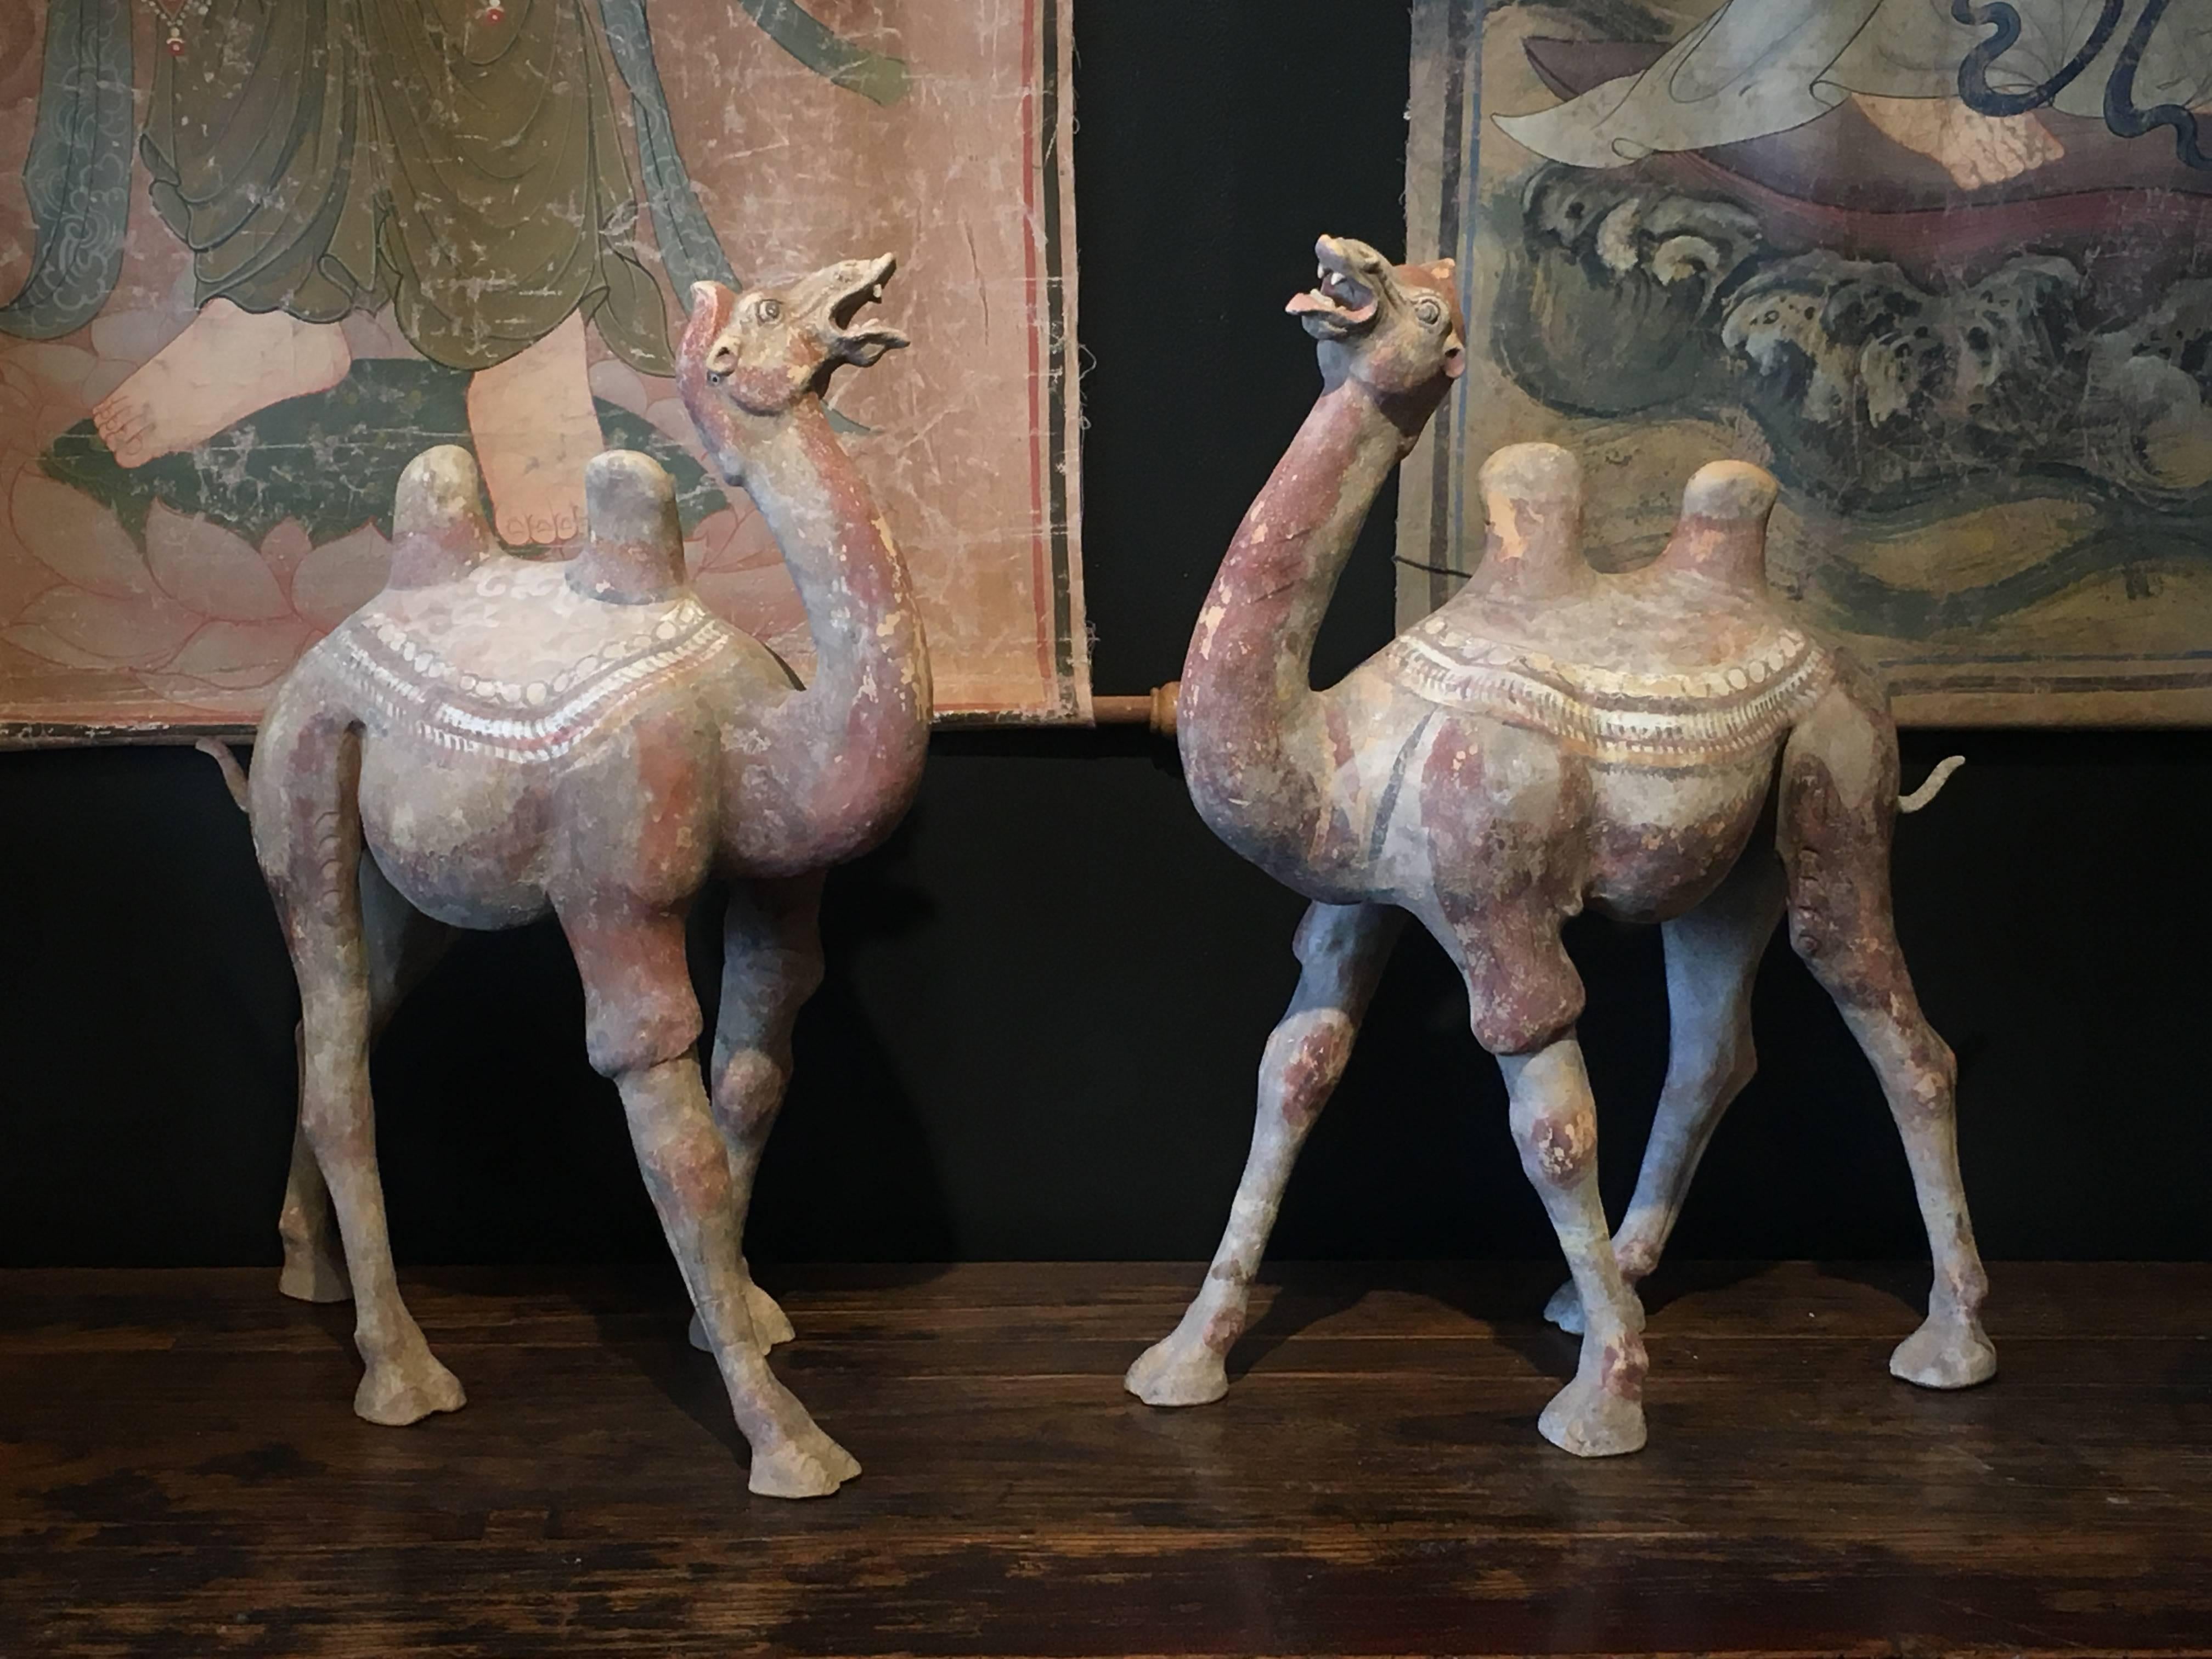 A stunning and impressive pair of large Tang Dynasty striding camels, TL tested by Oxford Authentication. 
The camels are portrayed in motion, caught mid-stride, with heads reared, mouths open in a triumphant bray. Their humps swaying in opposite